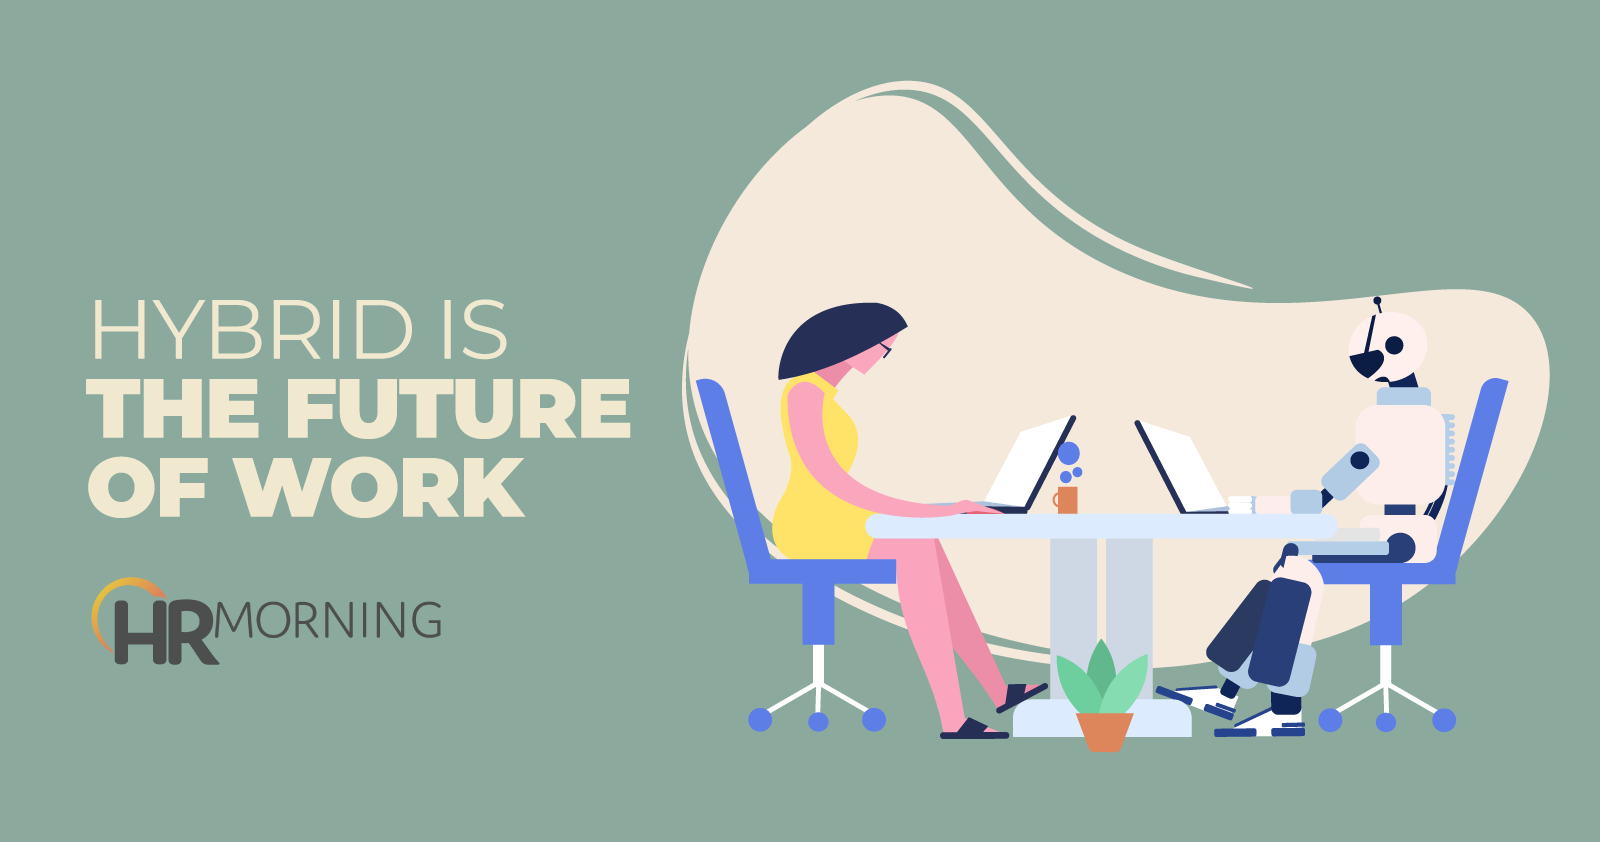 Hybrid is the future of work